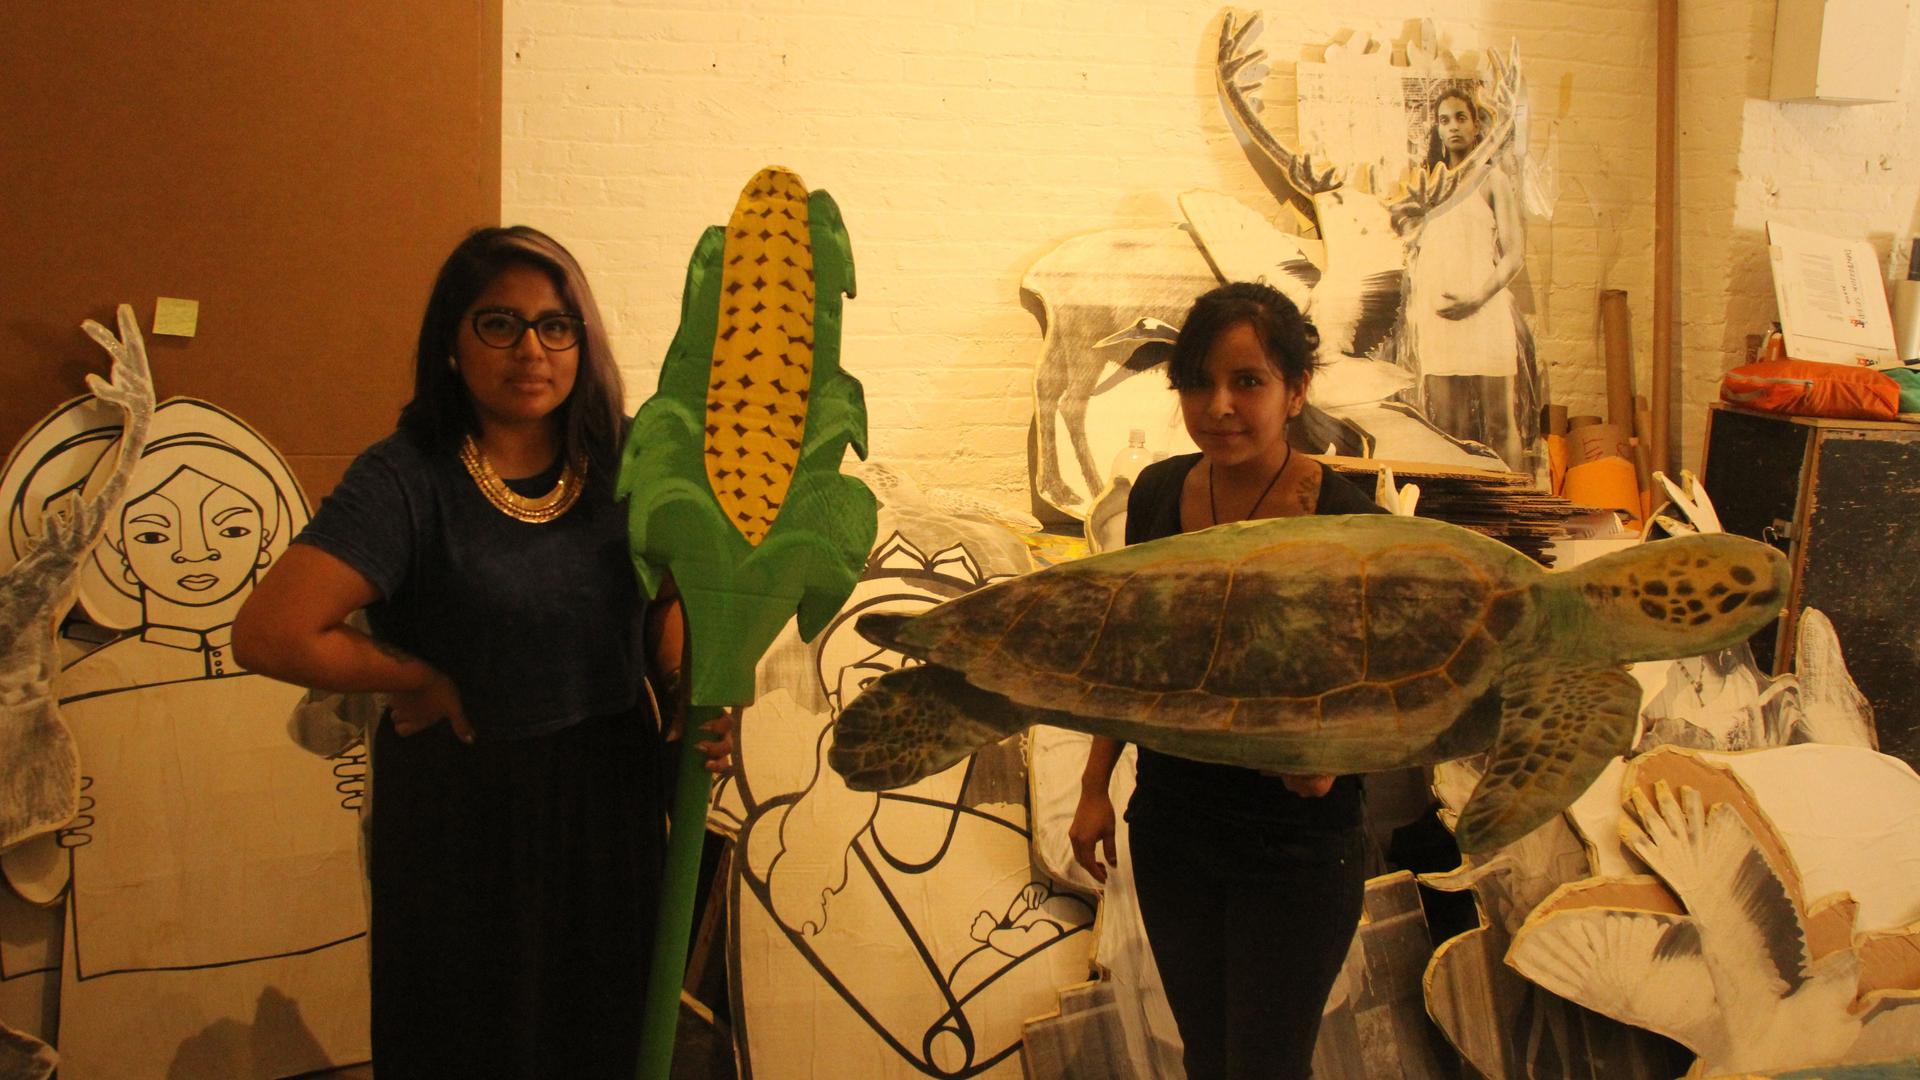 Sonia Guinansaca and Susana Garcia of the activist group CultureStrike will be carrying these images of crops and animals threatened by climate change in Sunday’s People’s Climate March in New York City.